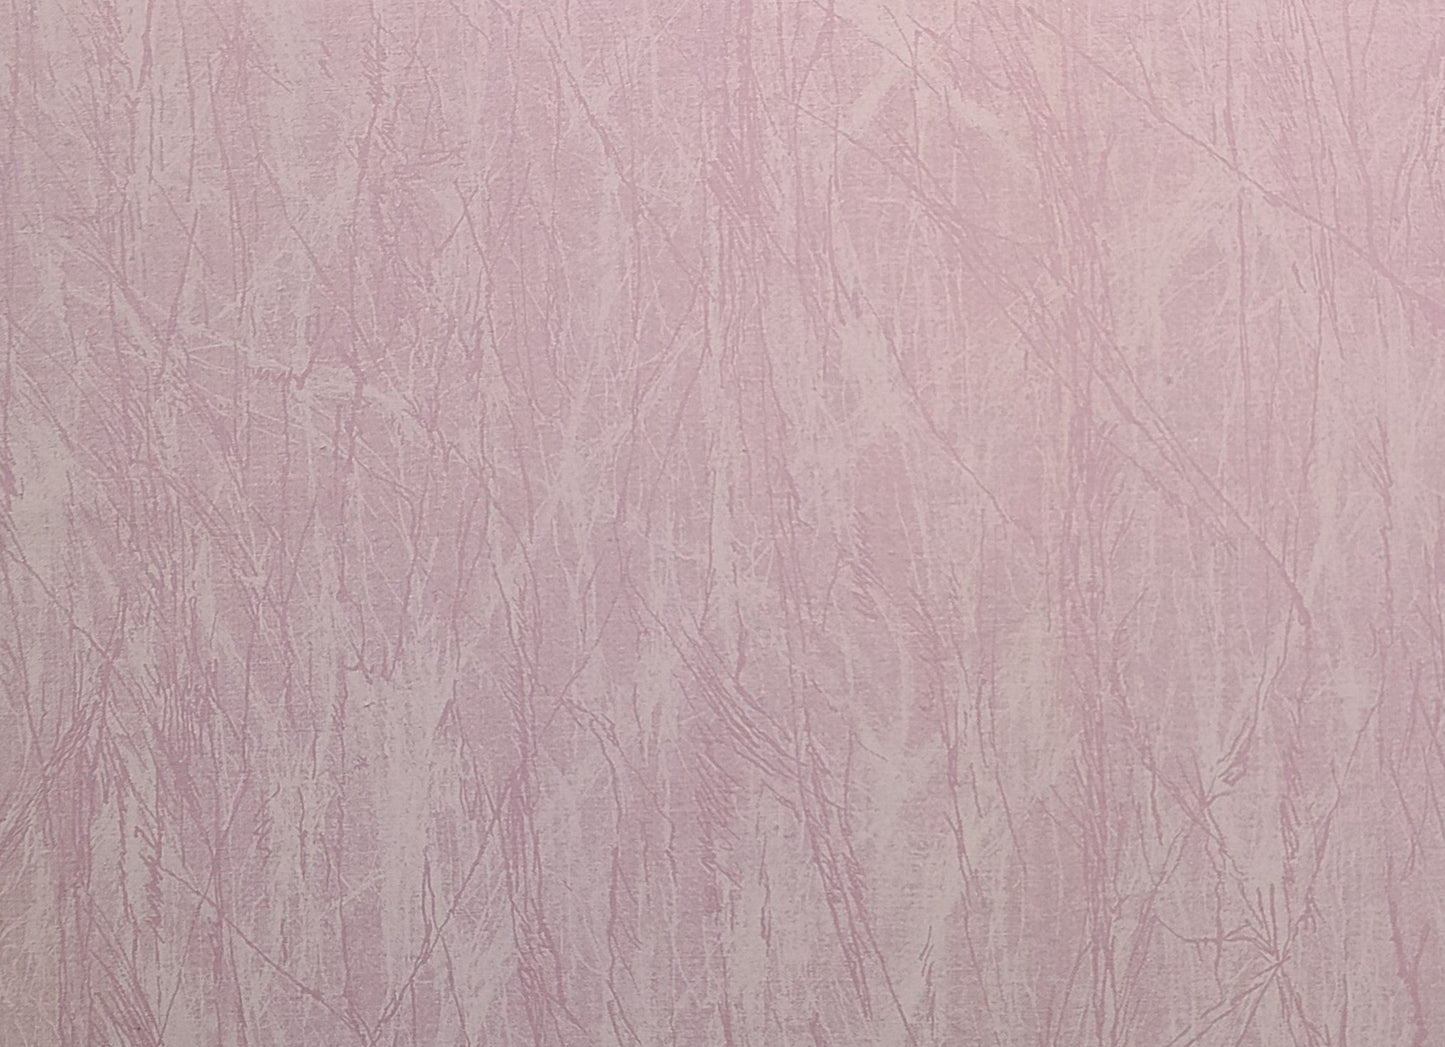 EOB - Pink Tonal "Crackle" Fabric - Selvage to Selvage Print